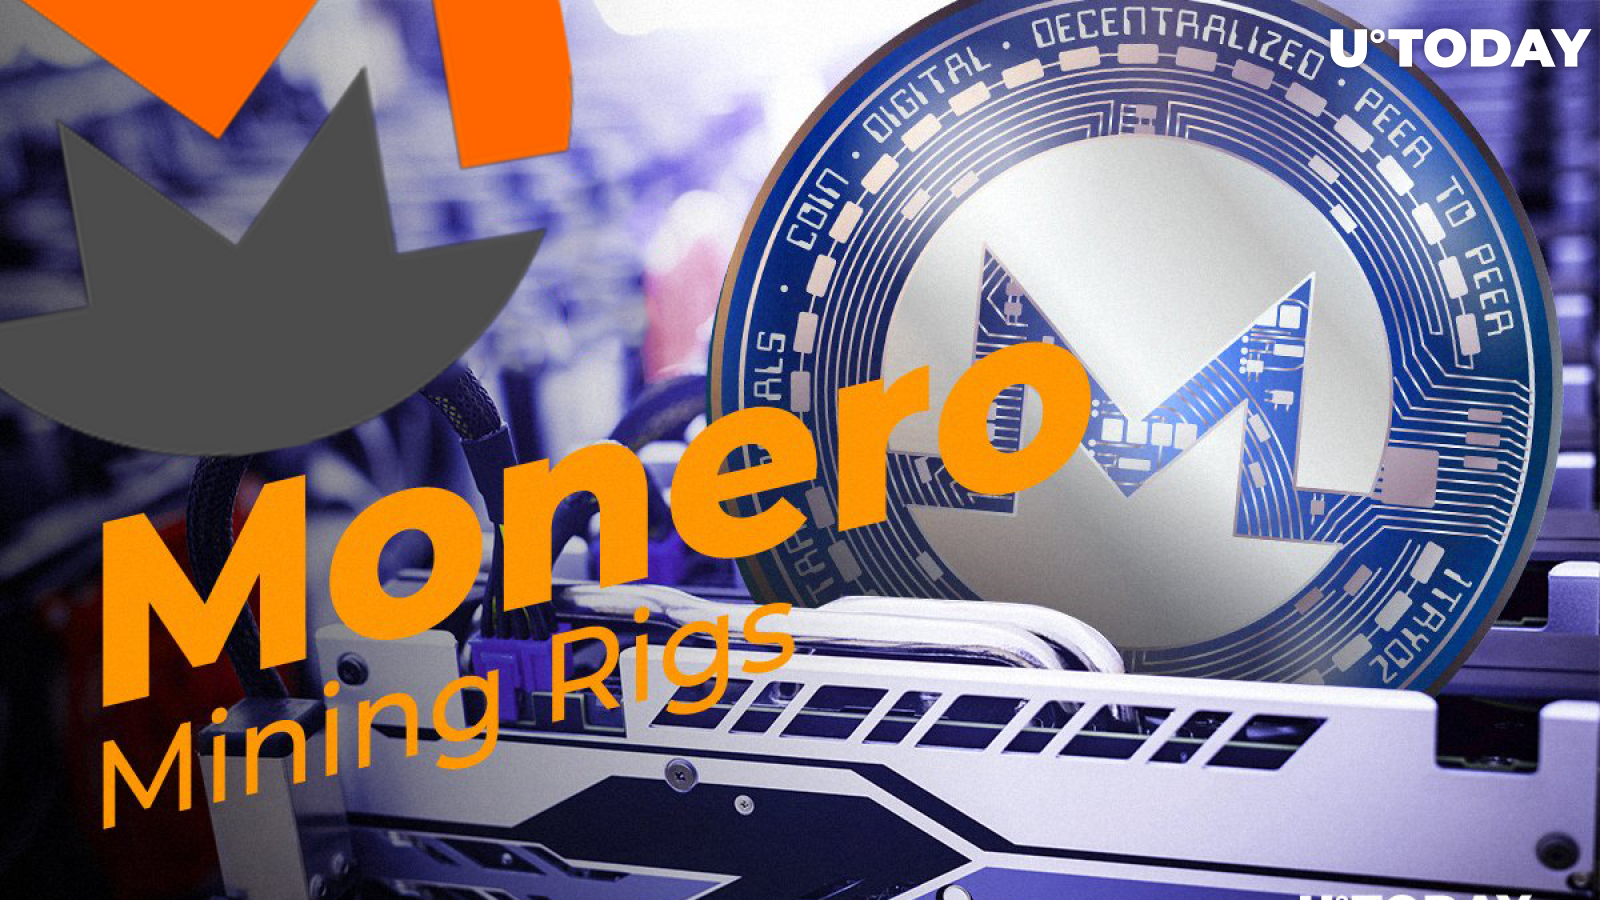 Monero Mining Rigs: How to Build a Cheap XMR Rig?